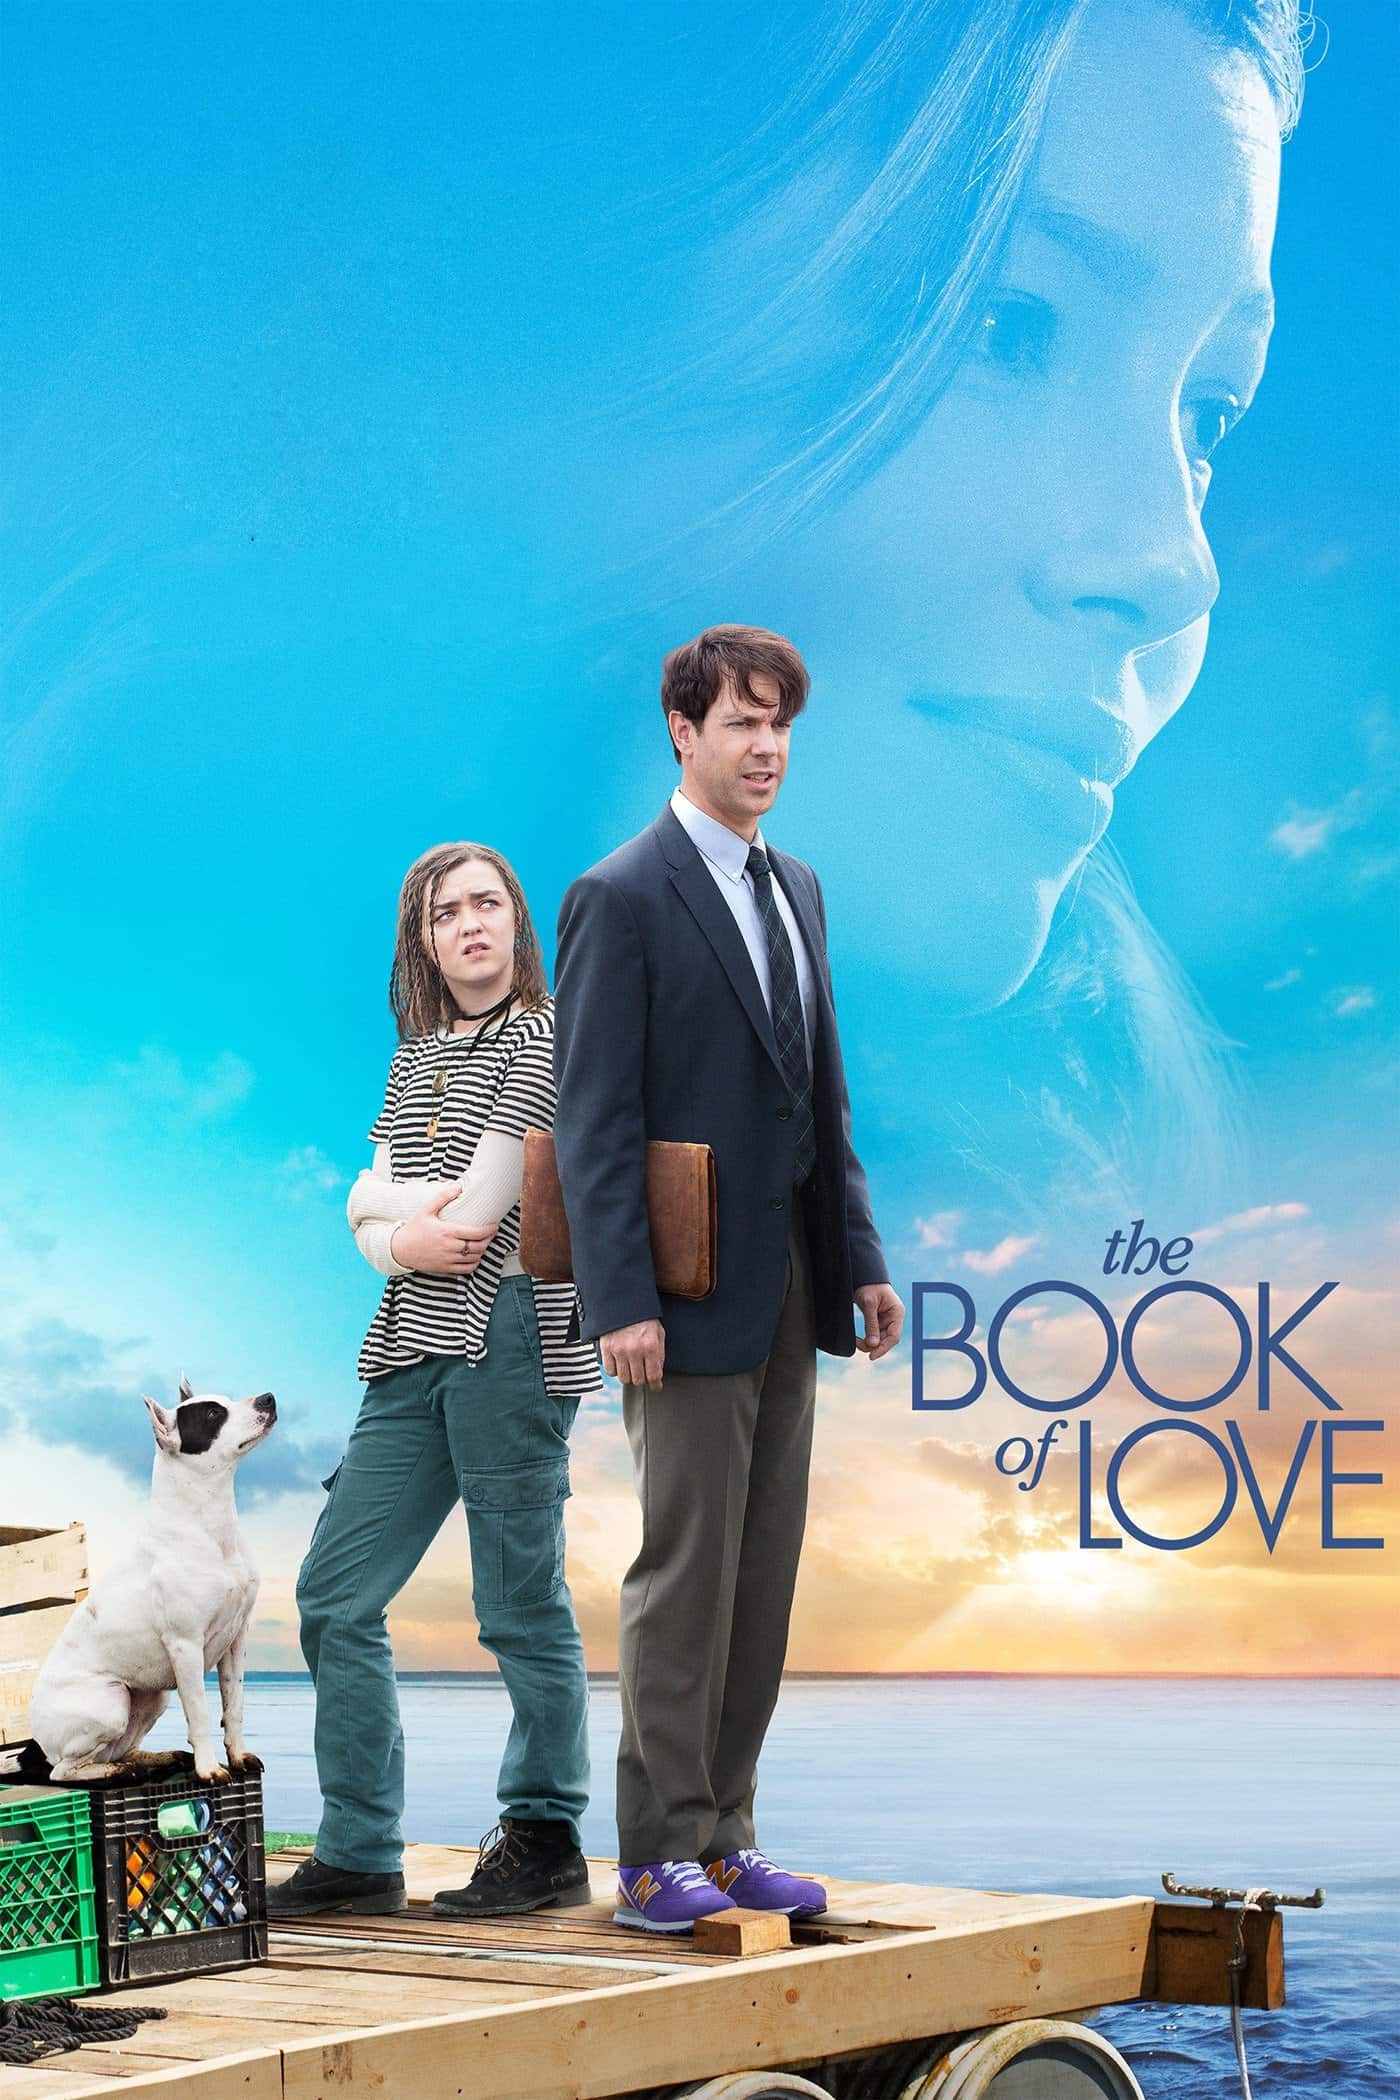 The Book of Love, 2016 